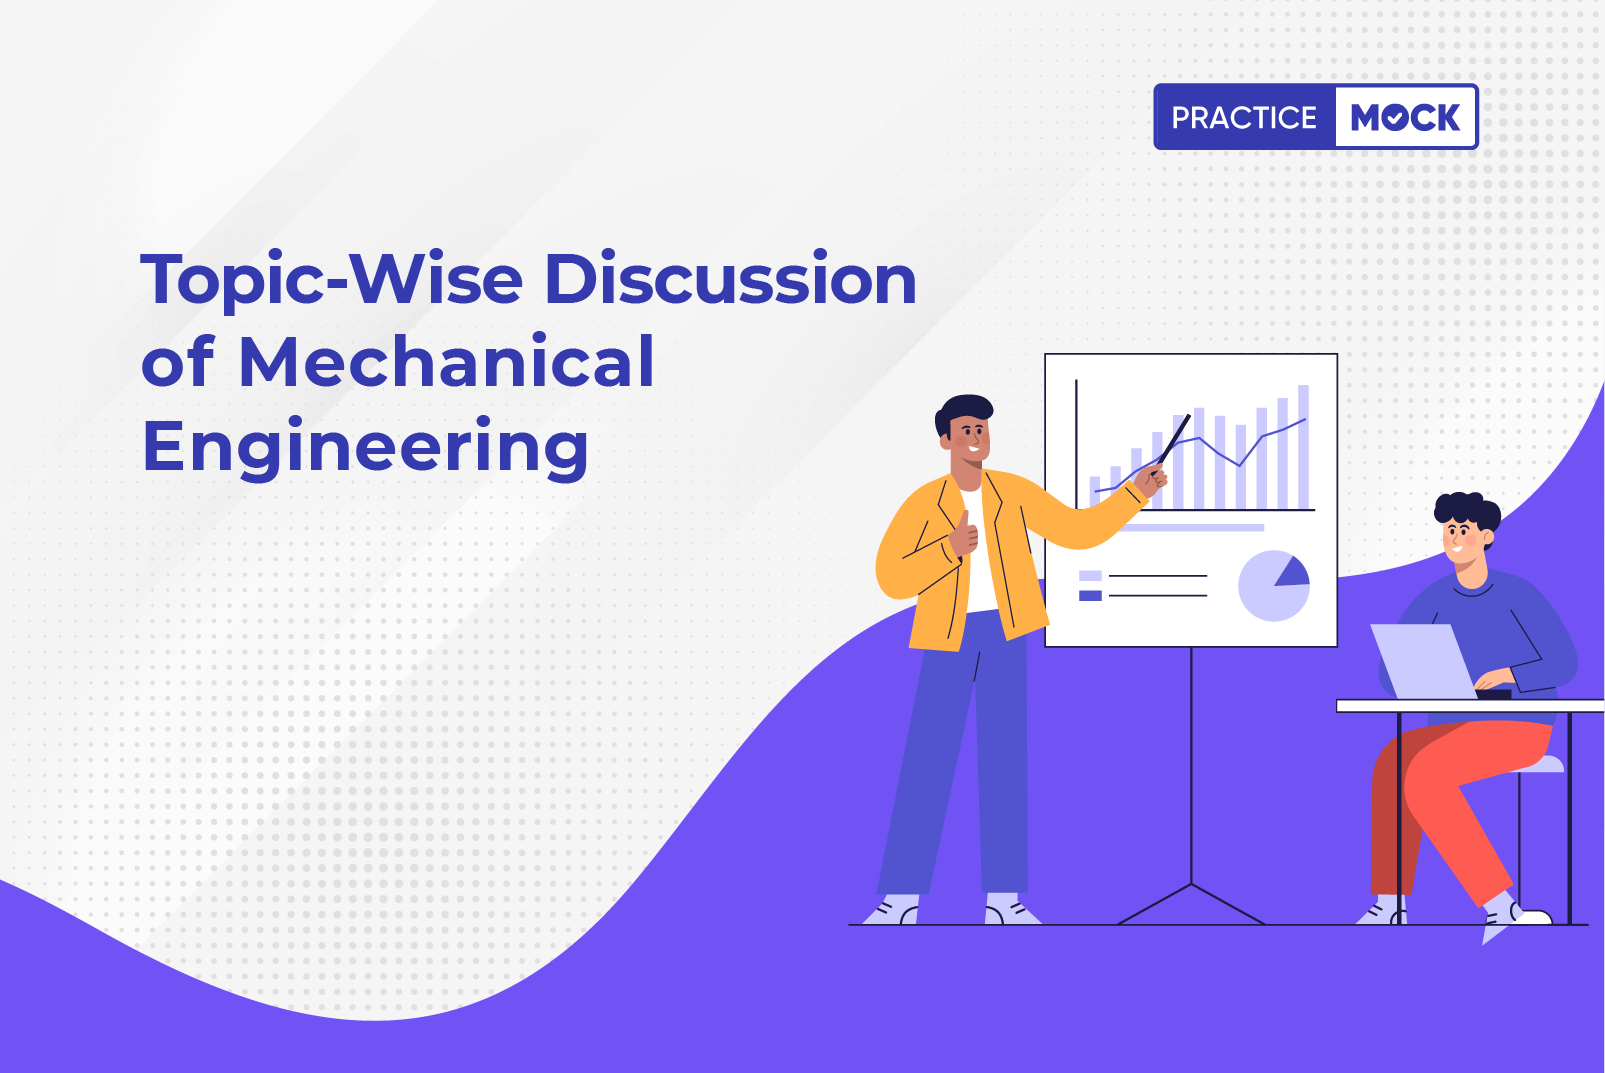 FI_Mechanical_Engineering_Topic-wise_Discussion_040423